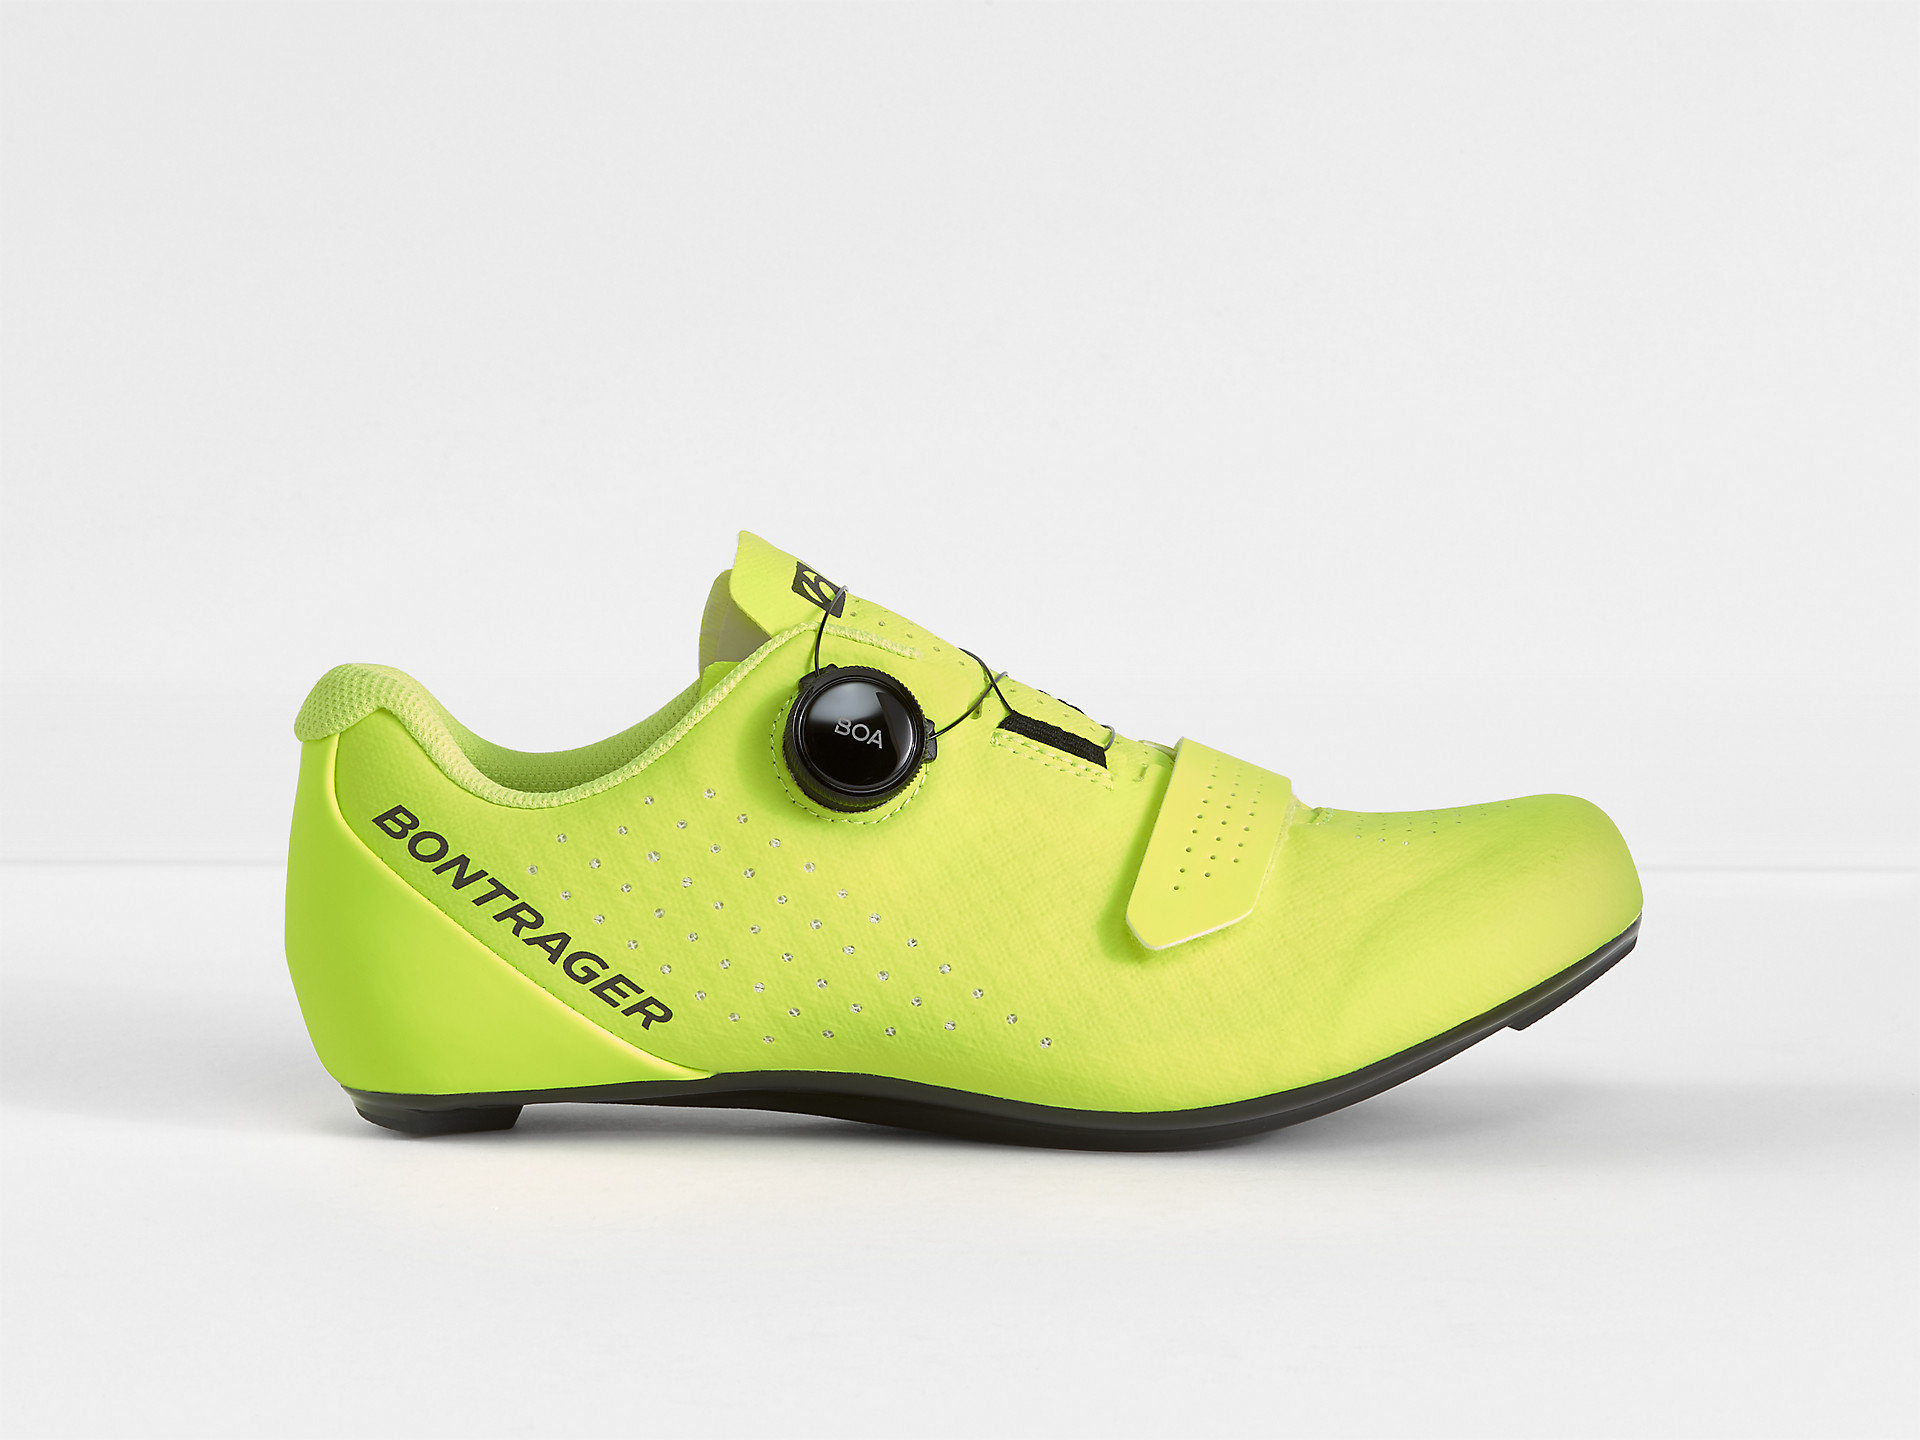 <a href="https://cycles-clement.be/product/chaussure-bont-circuit-race-43-yel/">CHAUSSURE BONT CIRCUIT RACE 43 YEL</a>